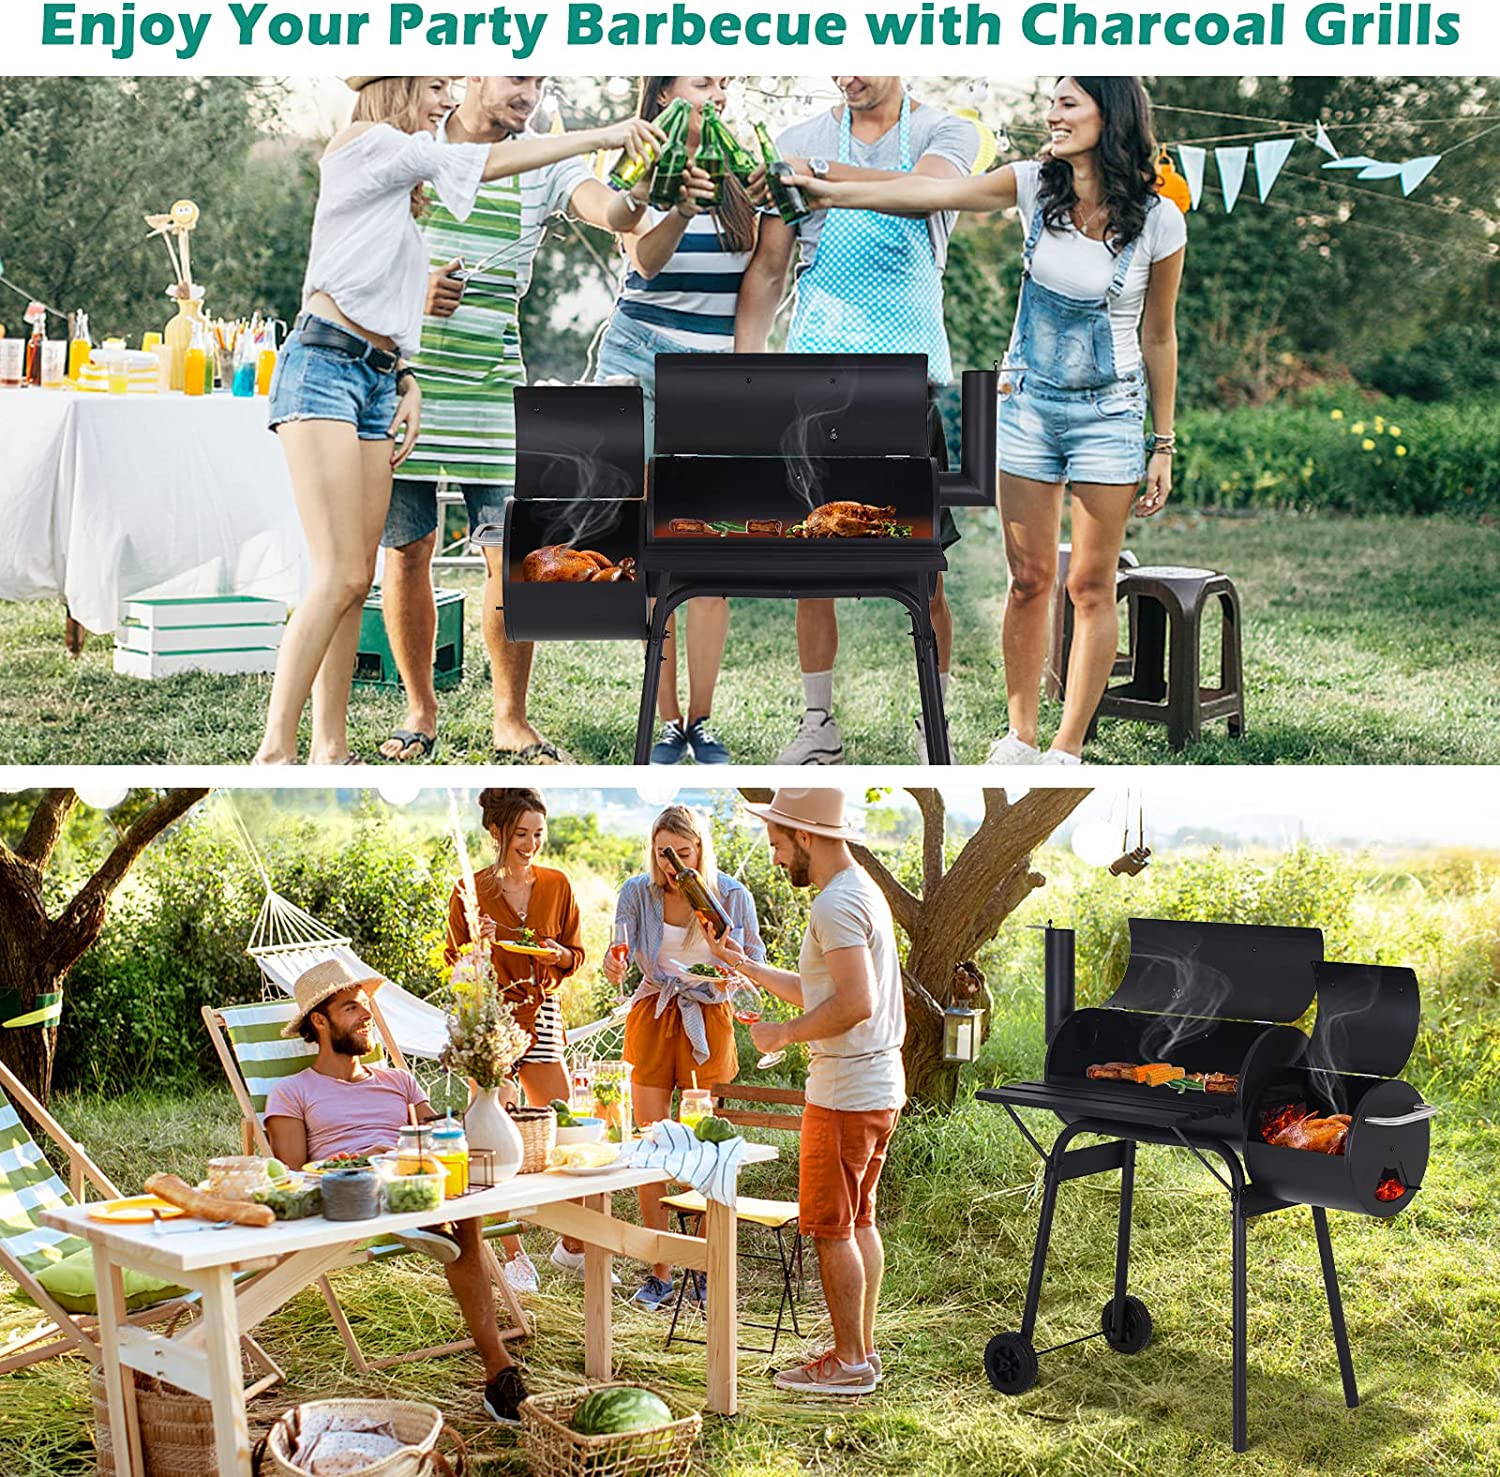 NiamVelo BBQ Charcoal Grills Outdoor BBQ Grill Camping Grill, Stainless Steel Grill Offset Smoker with Cover, Portable BBQ Barbecue Grill for Picnic Camping Party, Black - image 3 of 7